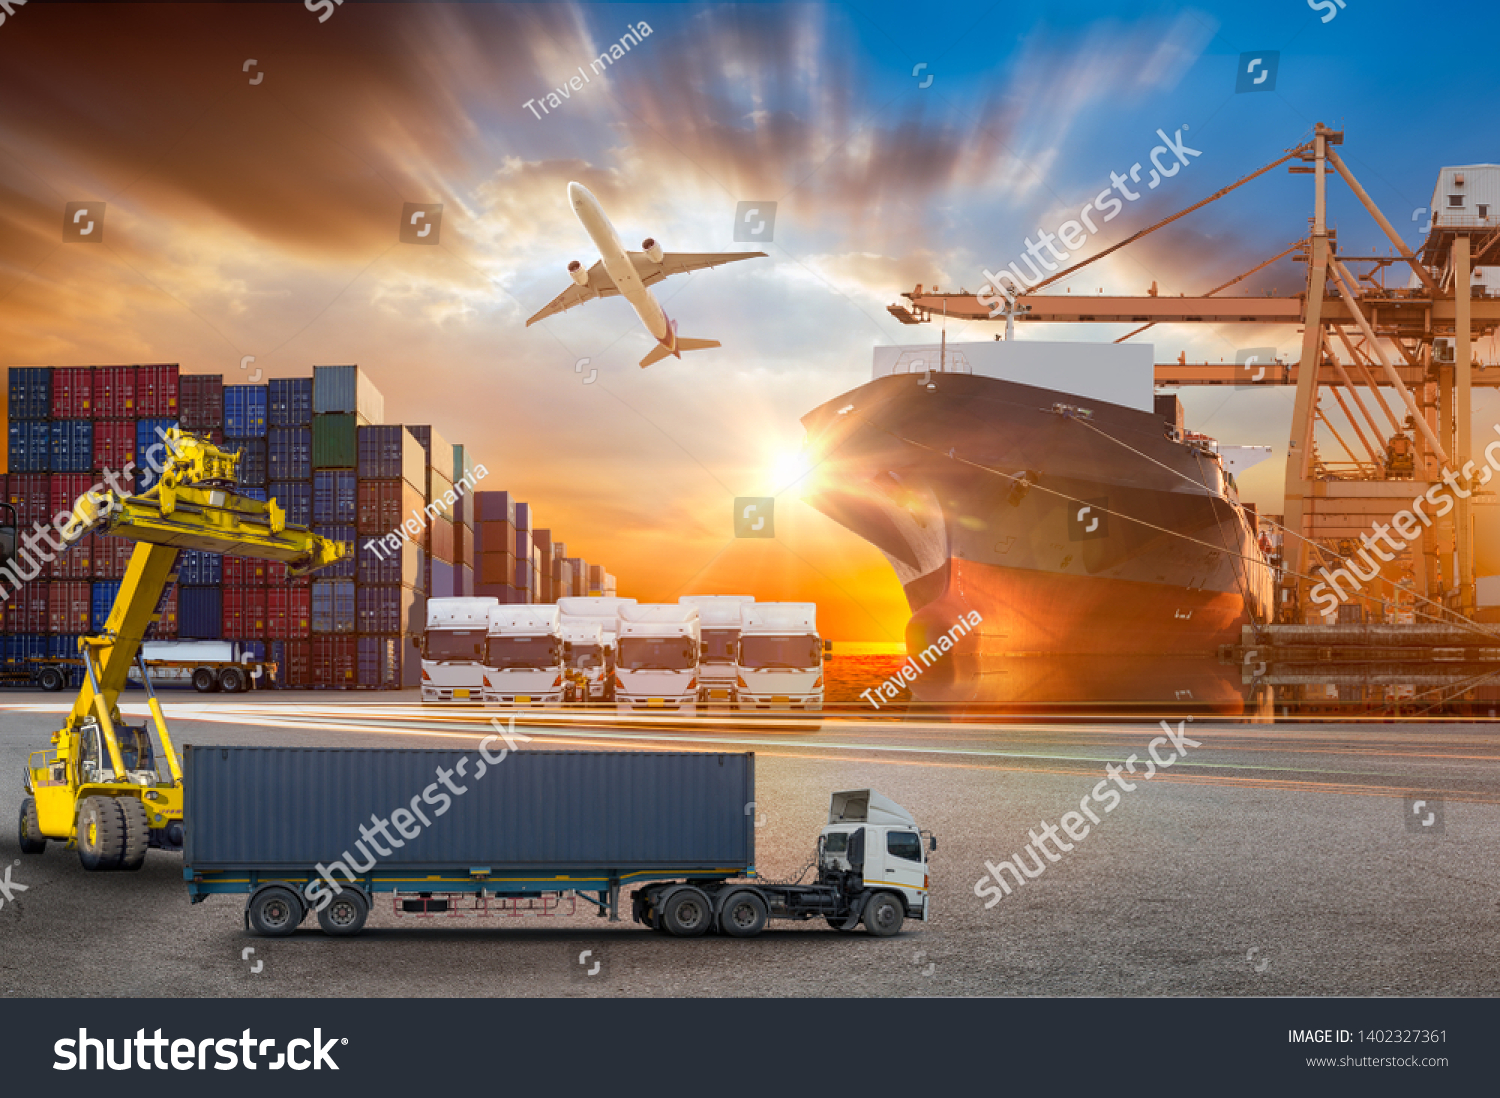 Logistics and transportation of Container Cargo ship and Cargo plane with working crane bridge in shipyard at sunrise, logistic import export and transport industry background #1402327361